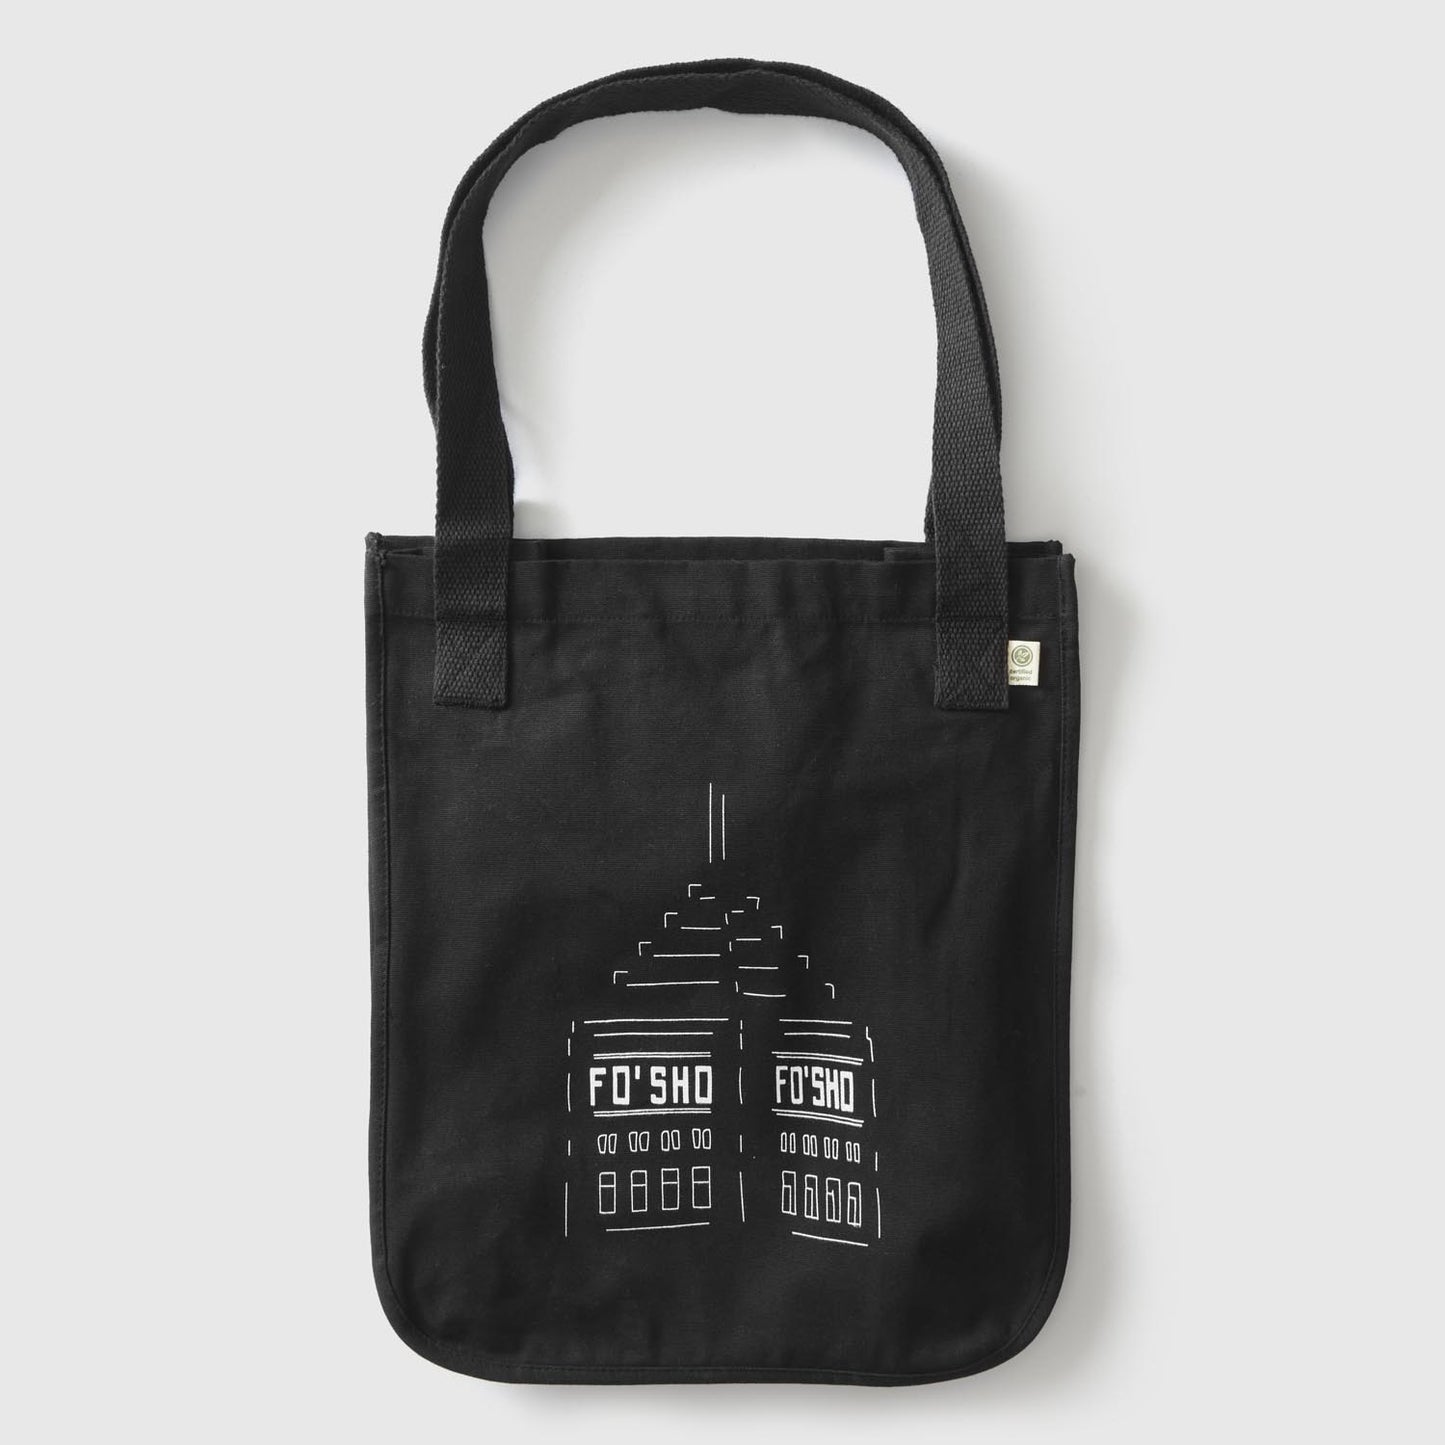 Black market tote with illustration depicting the Foshay Tower with Fo' Sho in place of Foshay. minnesota clothing, minnesota apparel, minnesota accessories, minnesota gifts, minnesota goods, minnesota themed clothing, minnesota themed apparel, minnesota themed gifts, minnesota themed goods, minnesota totes, minnesota tote bags, minnesota tote, minnesota themed tote bags, minnesota themed totes, minnesota themed tote